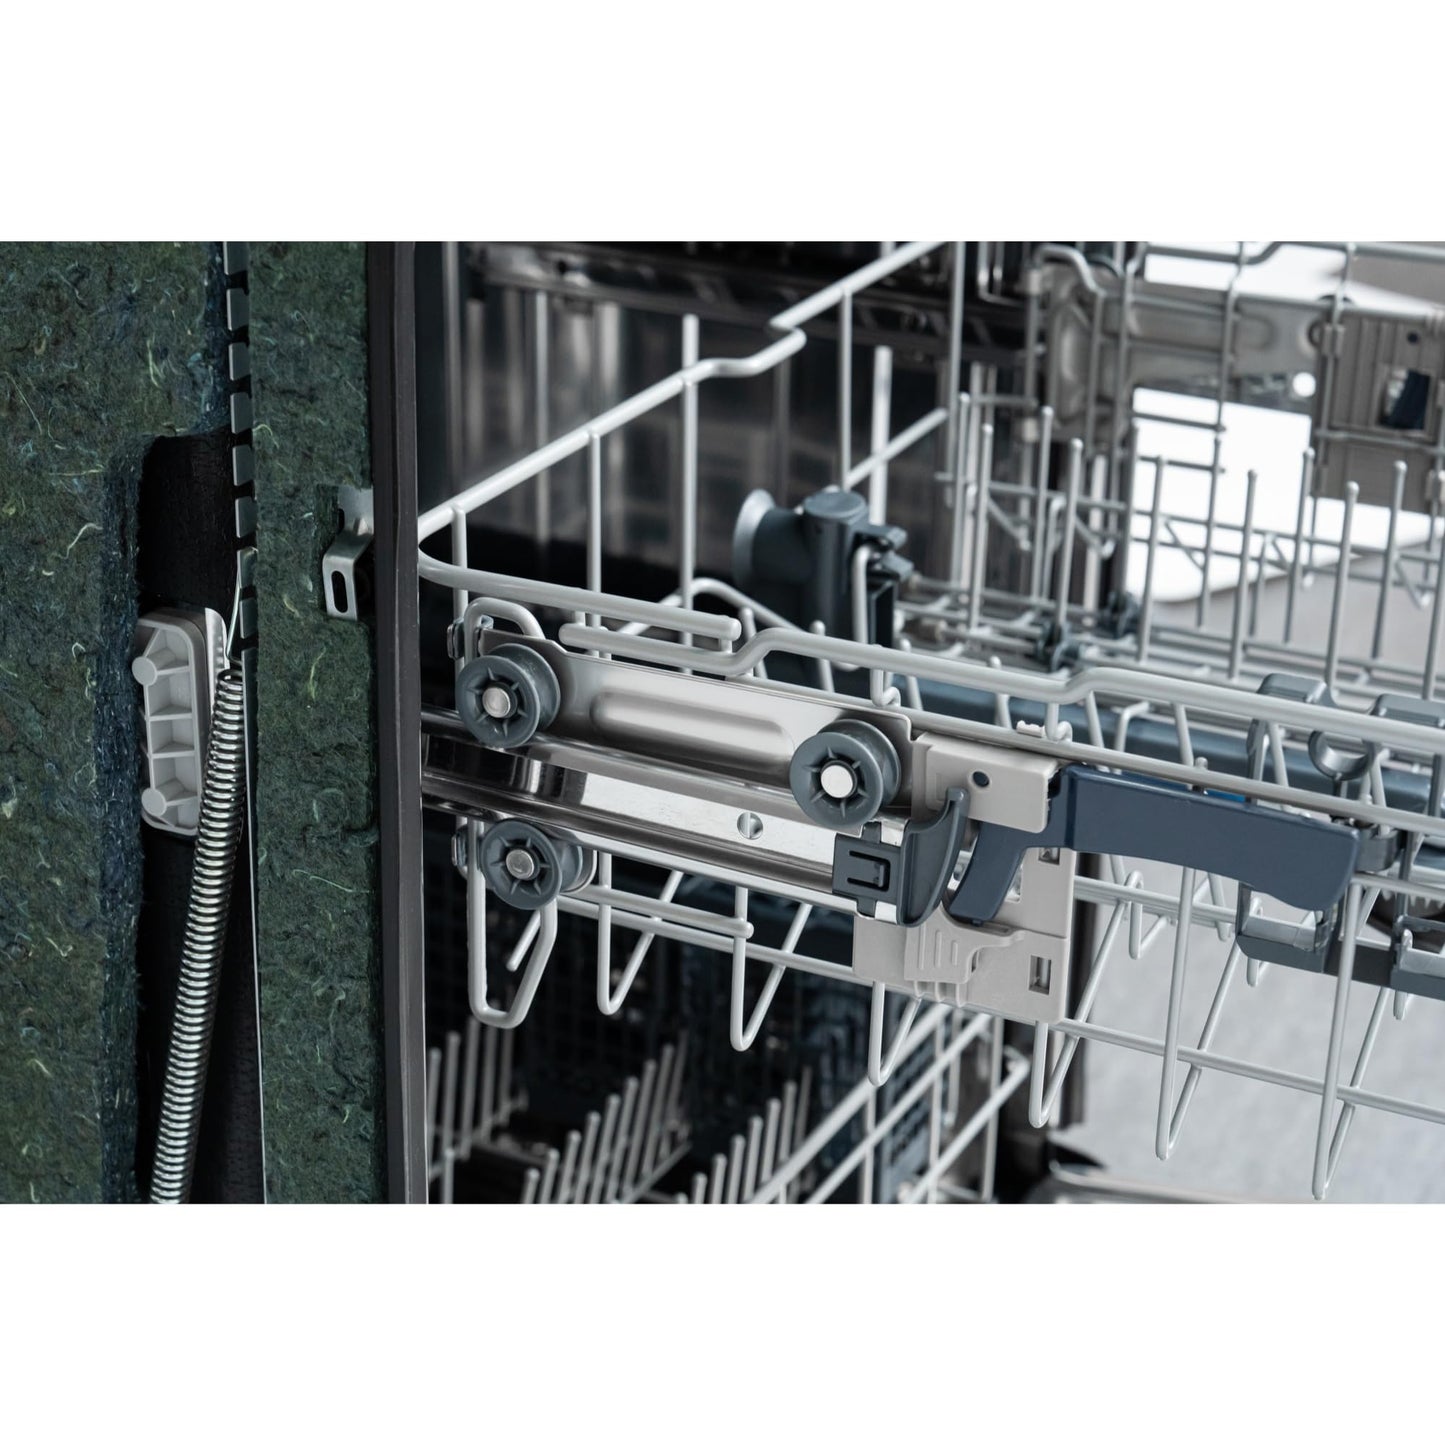 KoolMore KM-DW2445-PR 24 in. Panel Ready 14 Place Settings 45 DB Dishwasher in Stainless-Steel, UL and Energy Star Certified